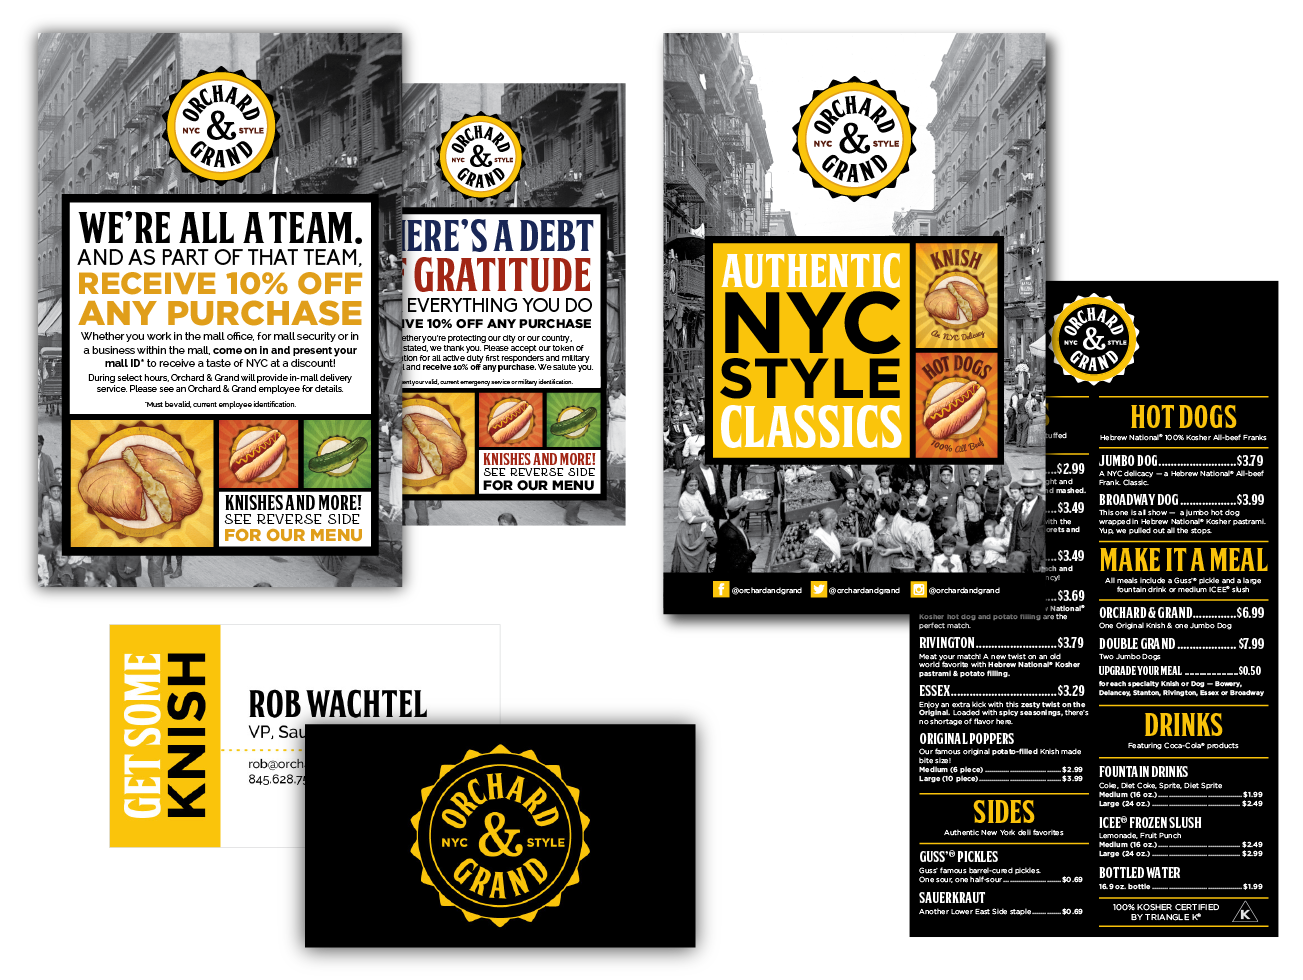 Orchard and Grand print collateral mockup